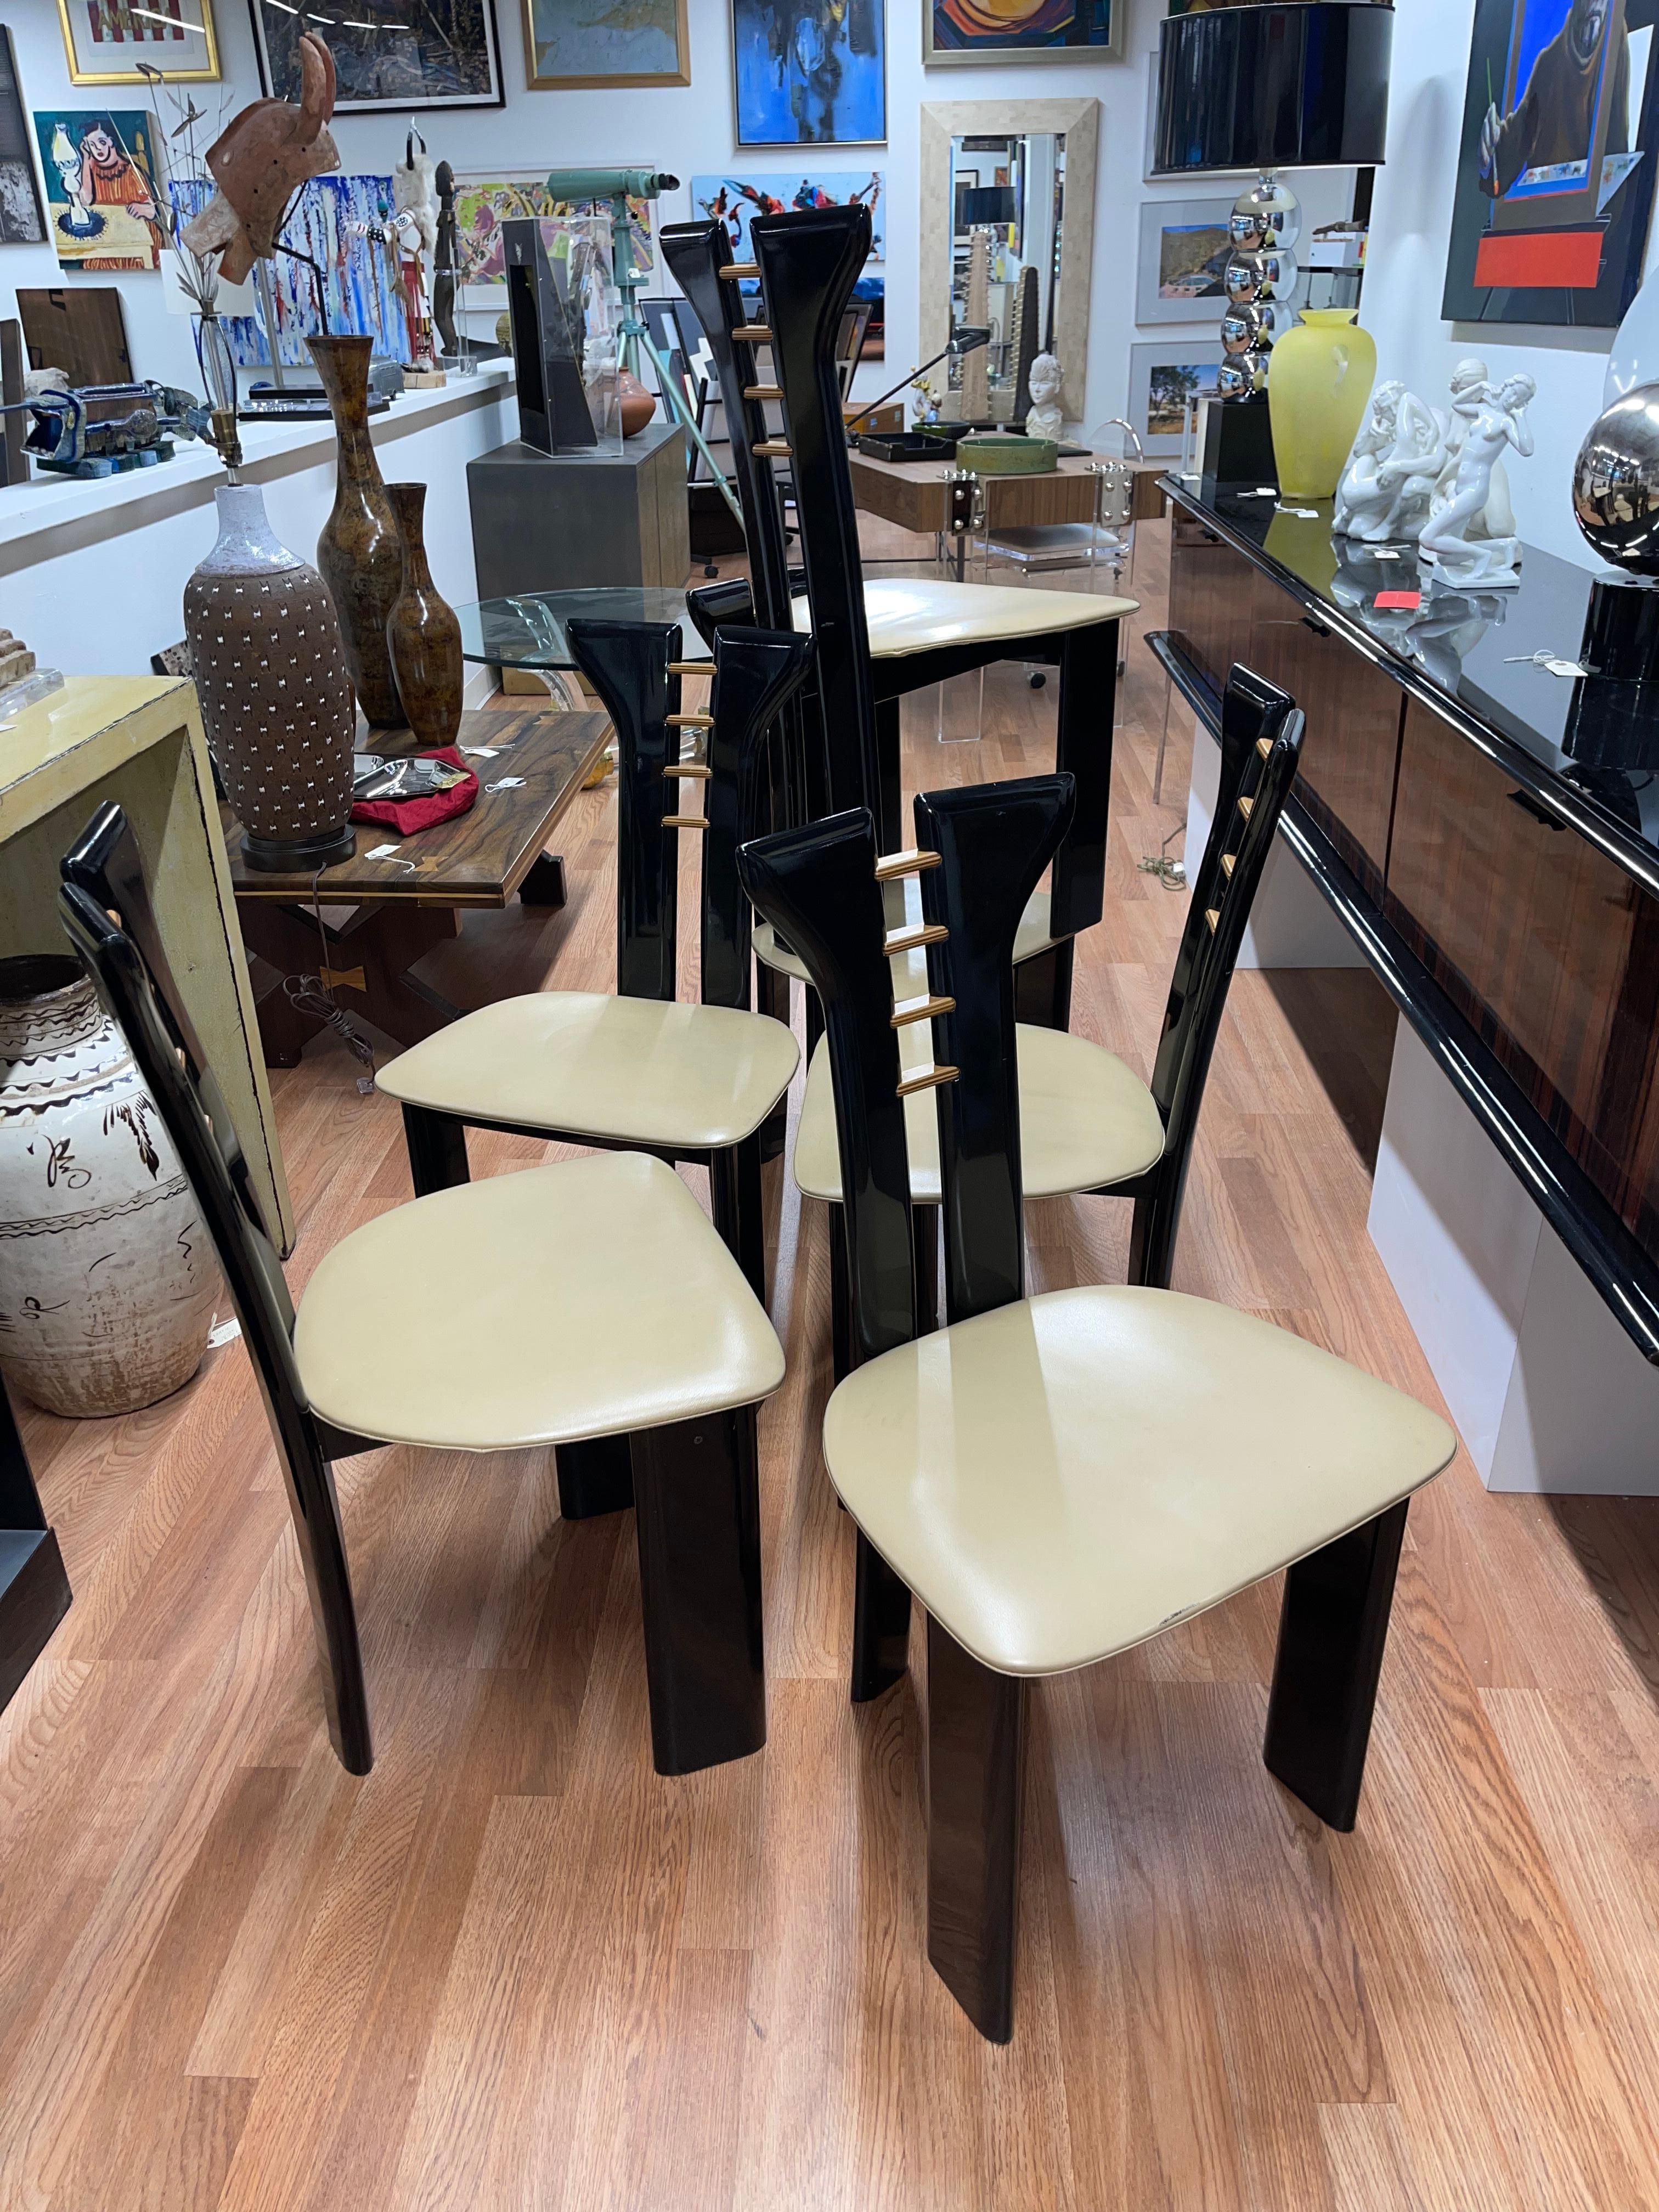 Beautiful elegant set of 6 1970’s Pierre Cardin designed dining chairs by Roche Bobois. Original beige leather seats. Black lacquer finish with wood accents. Good overall age appropriate condition with some marks to the lacquer and leather cushions.